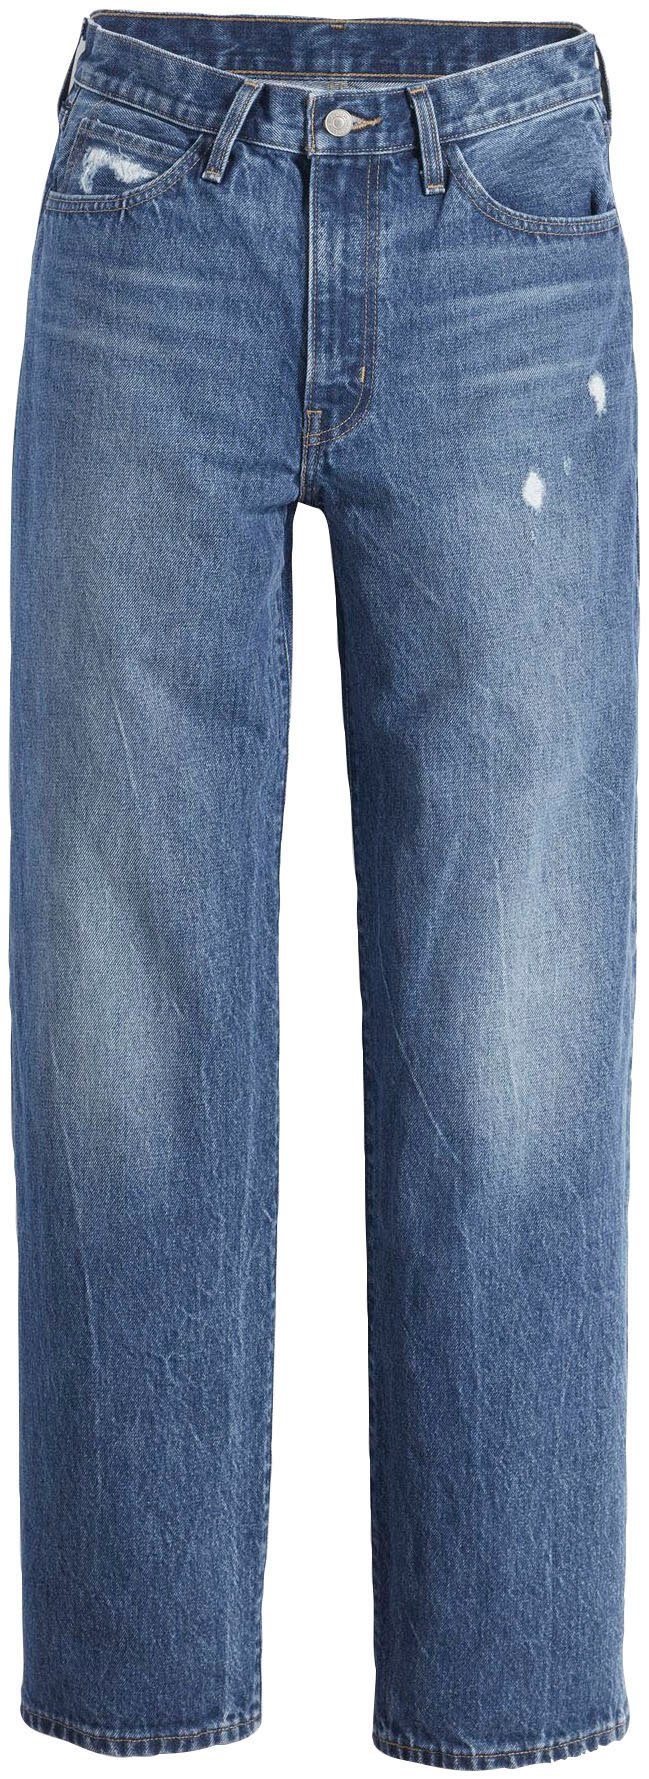 Levi's® Gerade Jeans MIDDY STRAIGHT blue used